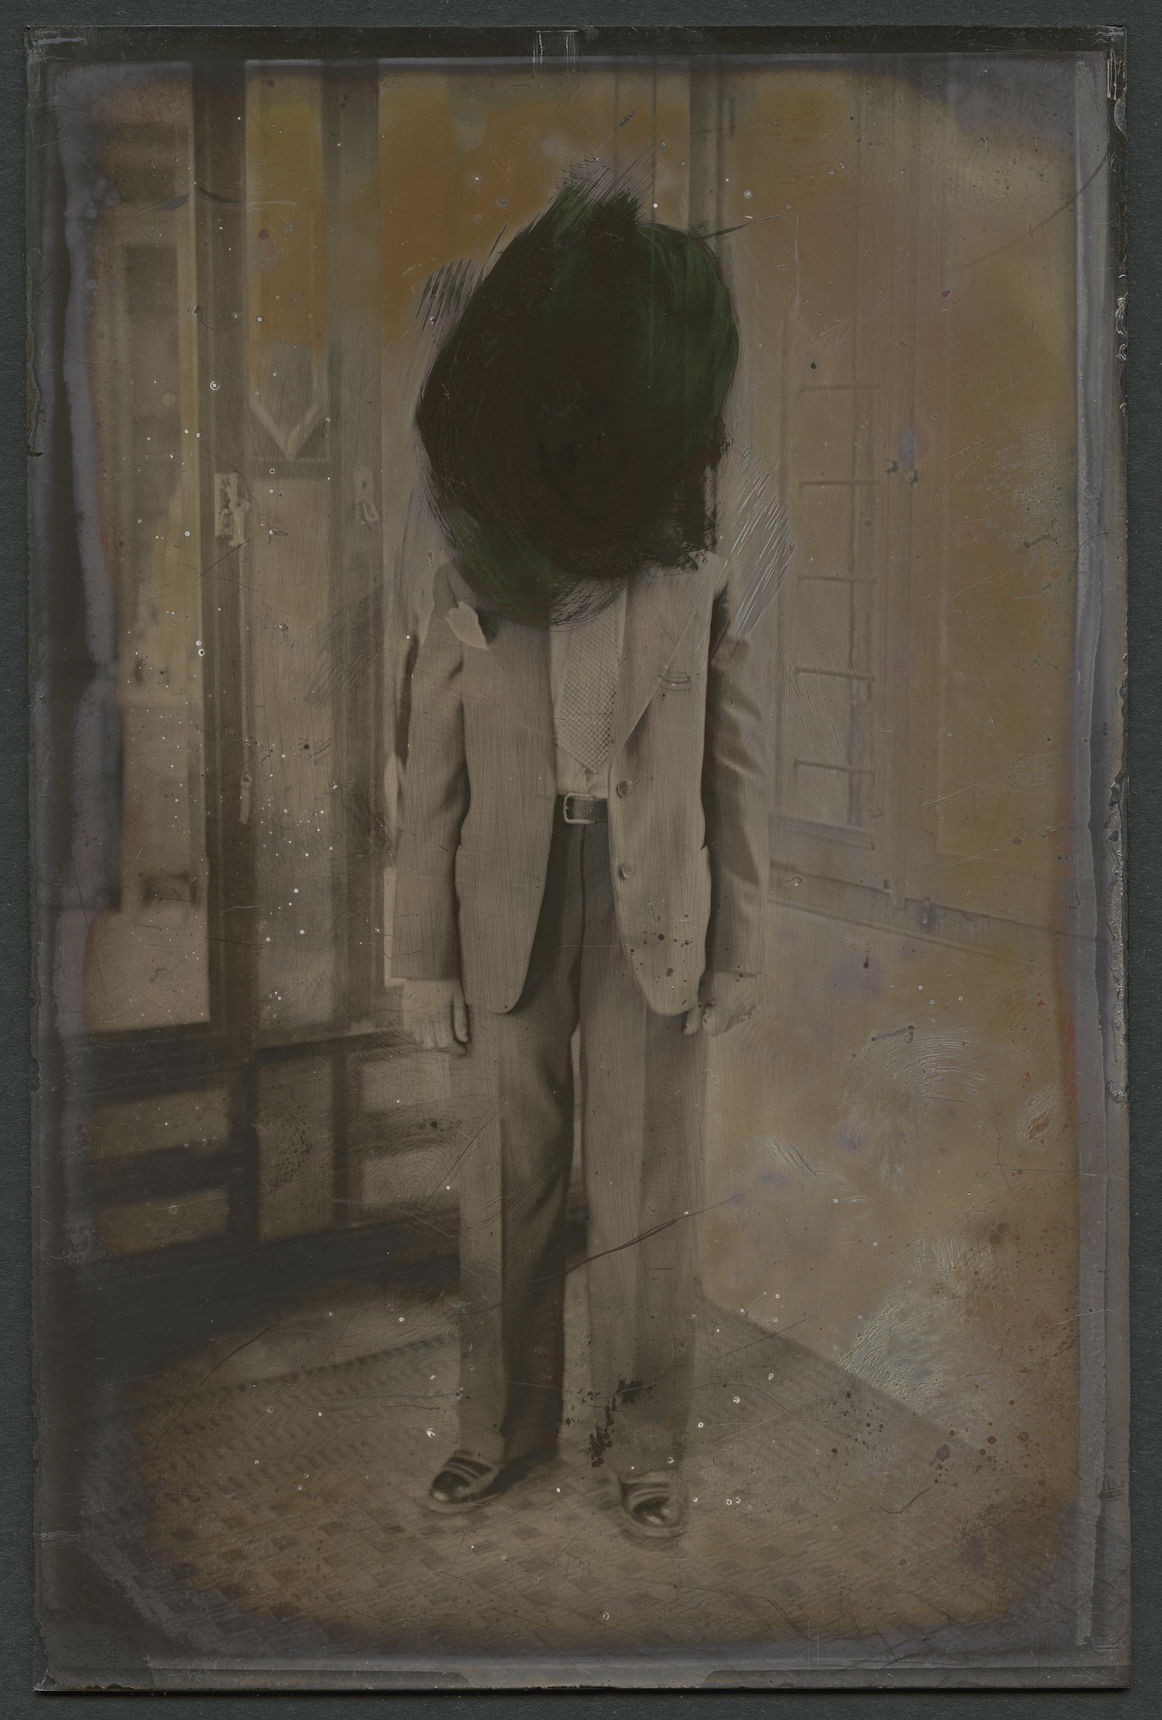 Woman dressed up in a suit, Muhamad Orabi, undated, Tripoli, Lebanon. ​
Mohsen Yammine Collection, courtesy of the Arab Image Foundation, Beirut